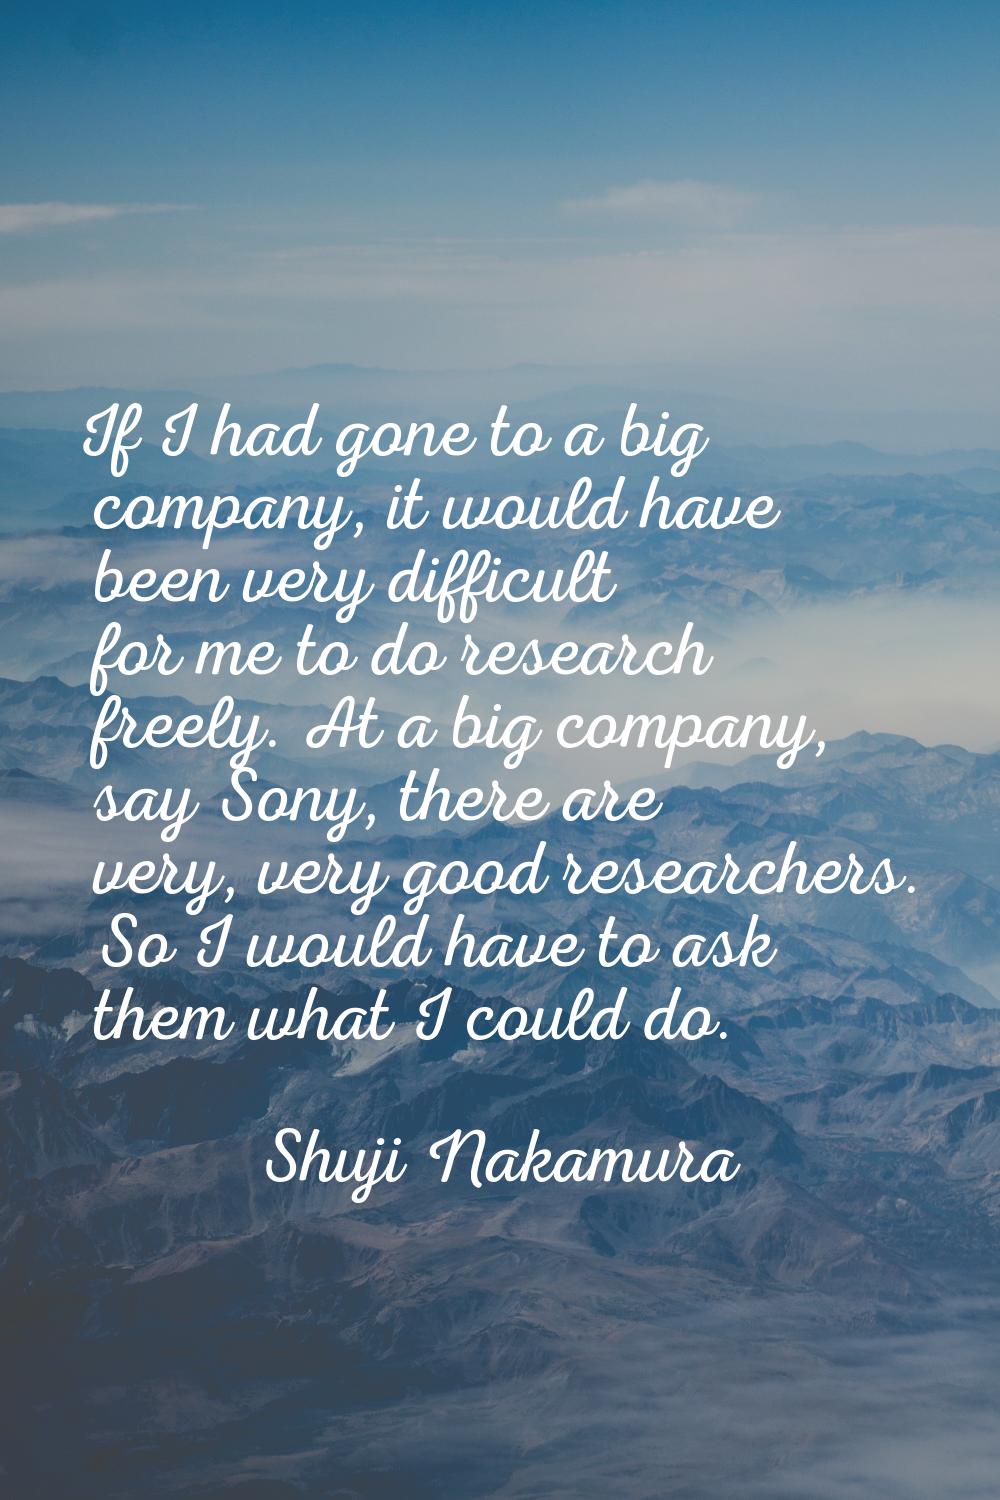 If I had gone to a big company, it would have been very difficult for me to do research freely. At 